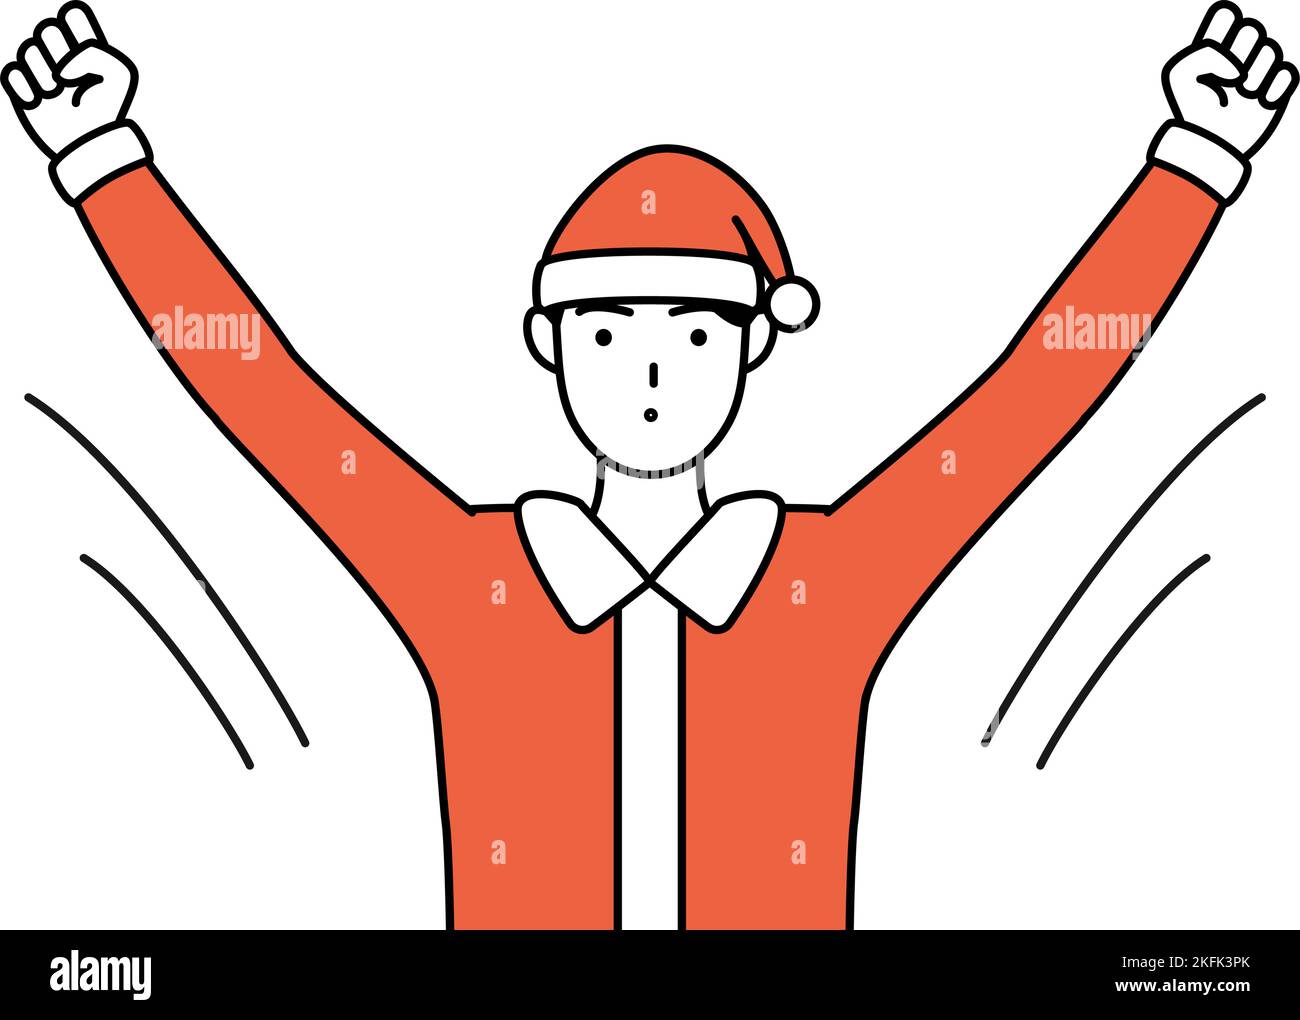 Simple line drawing illustration of a man dressed as Santa Claus taking a deep breath. Stock Vector